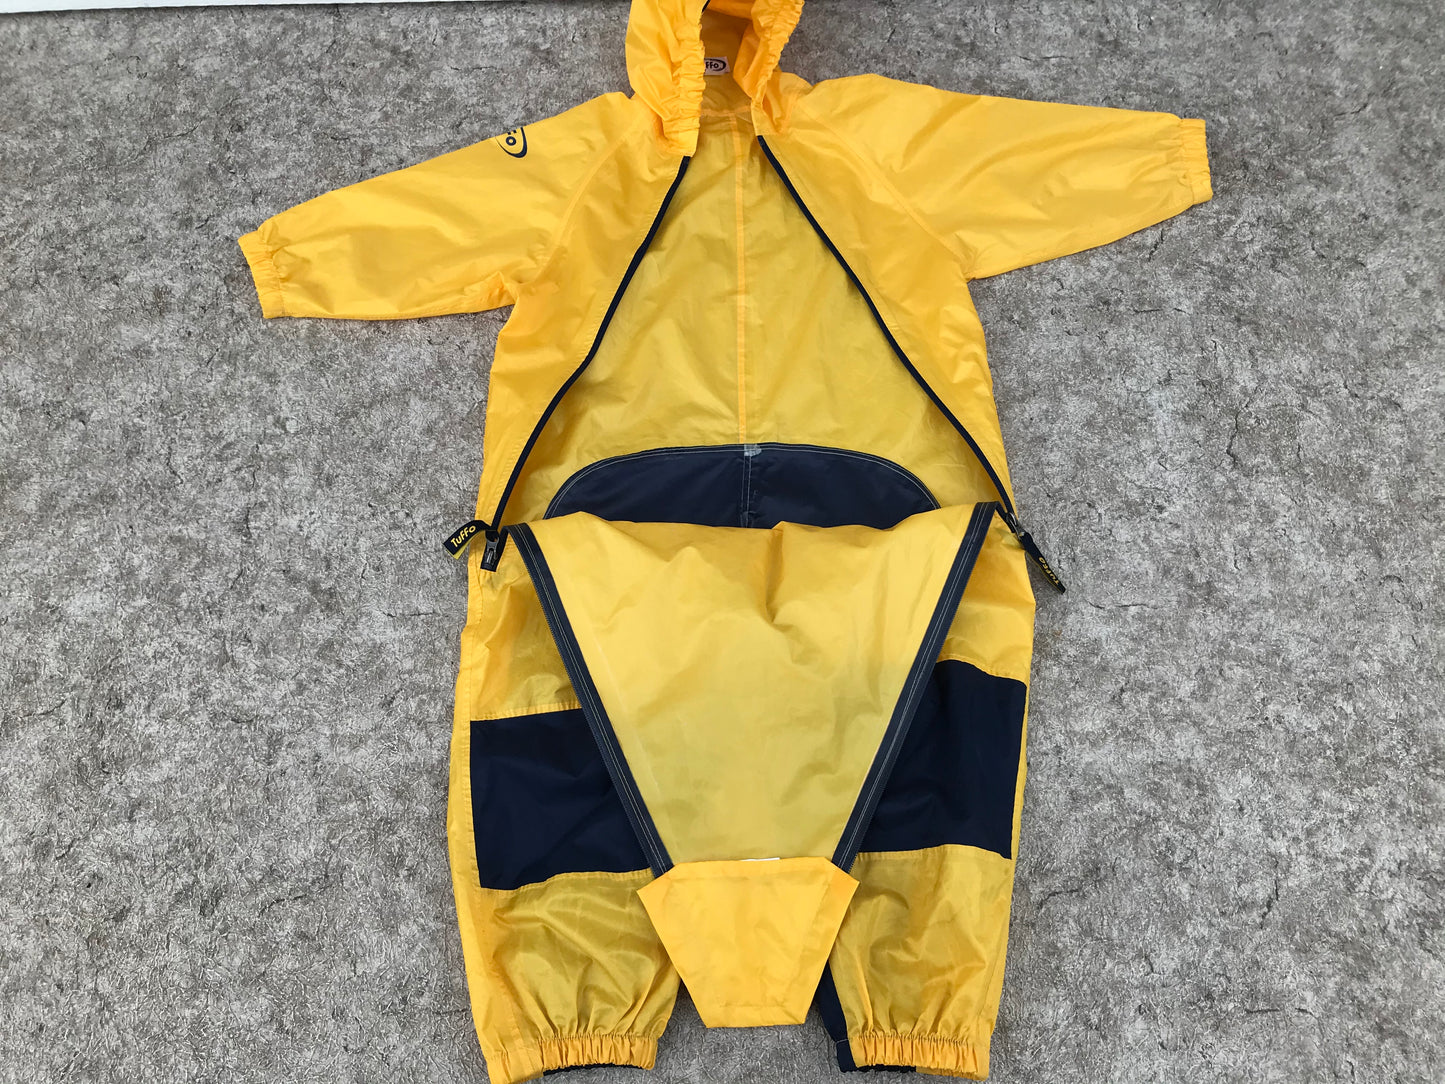 Rain Suit Child Size 5 Muddy Buddy Tuffo Pants Coat Yellow Navy Excellent